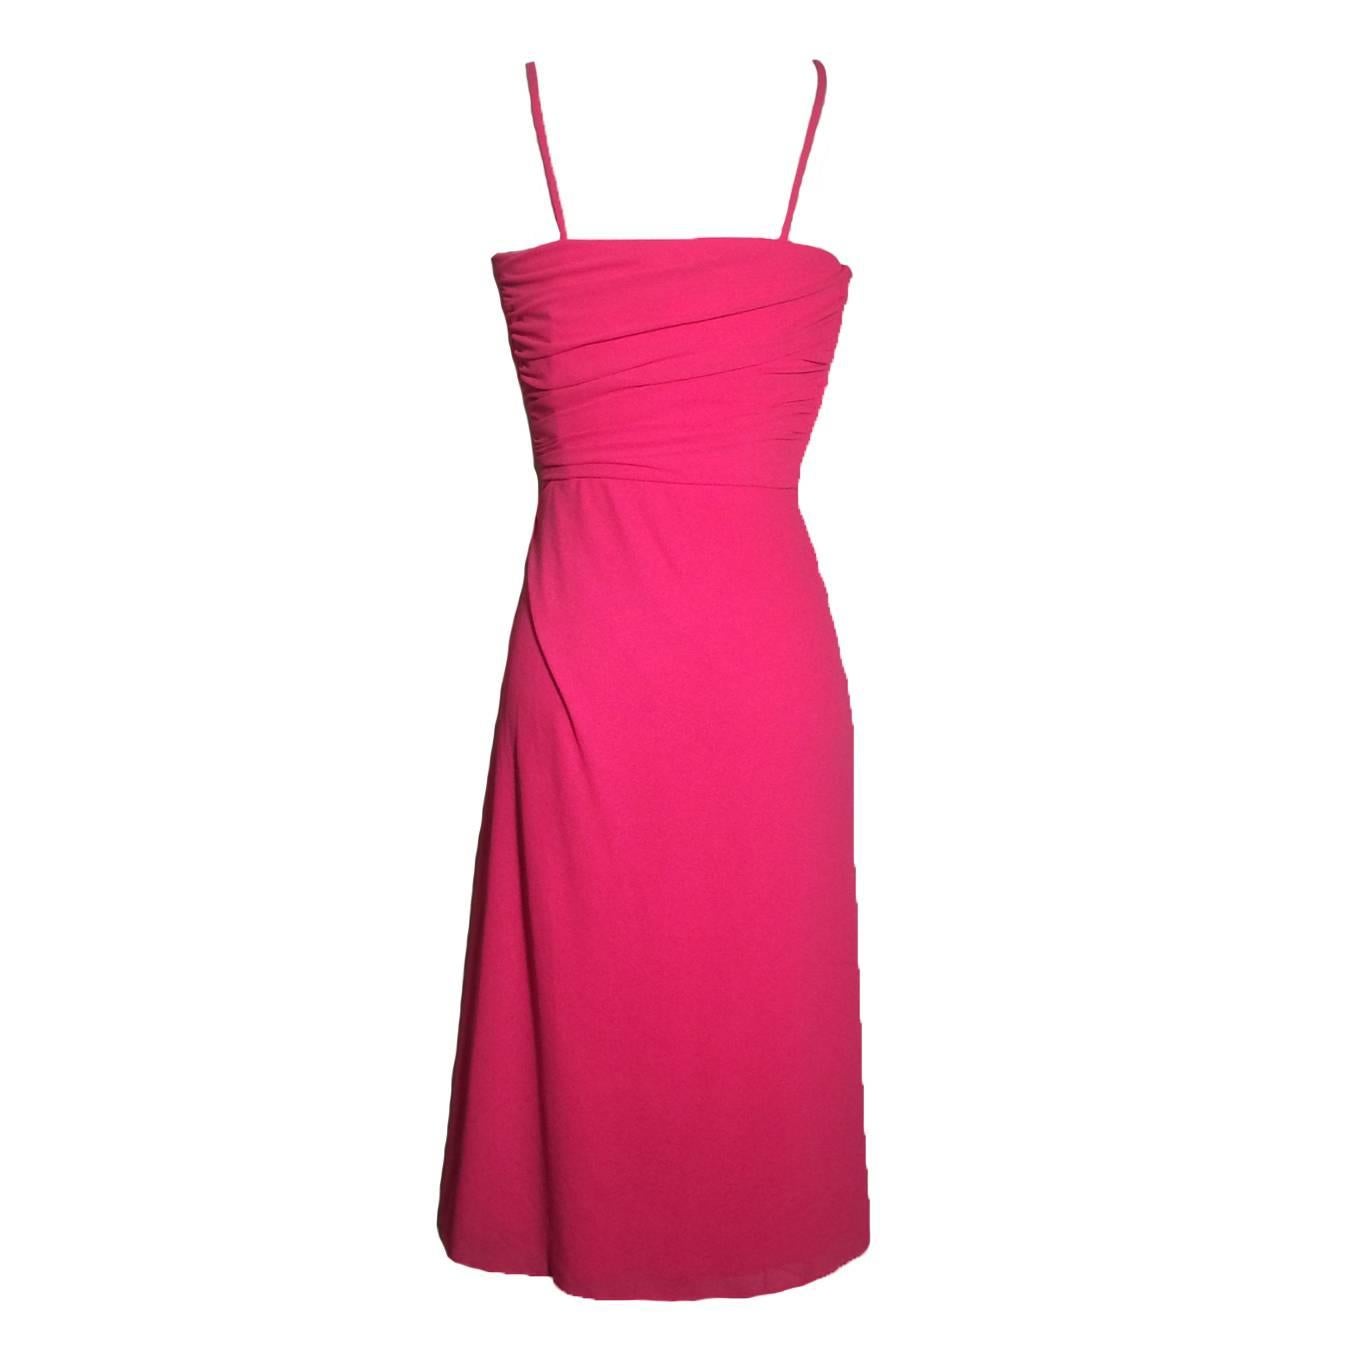 Vintage 70s Frank Usher draped jersey disco-style dress in bright pink. Ruched at side bodice. Back skirt wraps around over side zip to snap and tie at opposite side, creating a faux-wrap effect.

Size not listed, fits like XS/0. Lots of stretch,